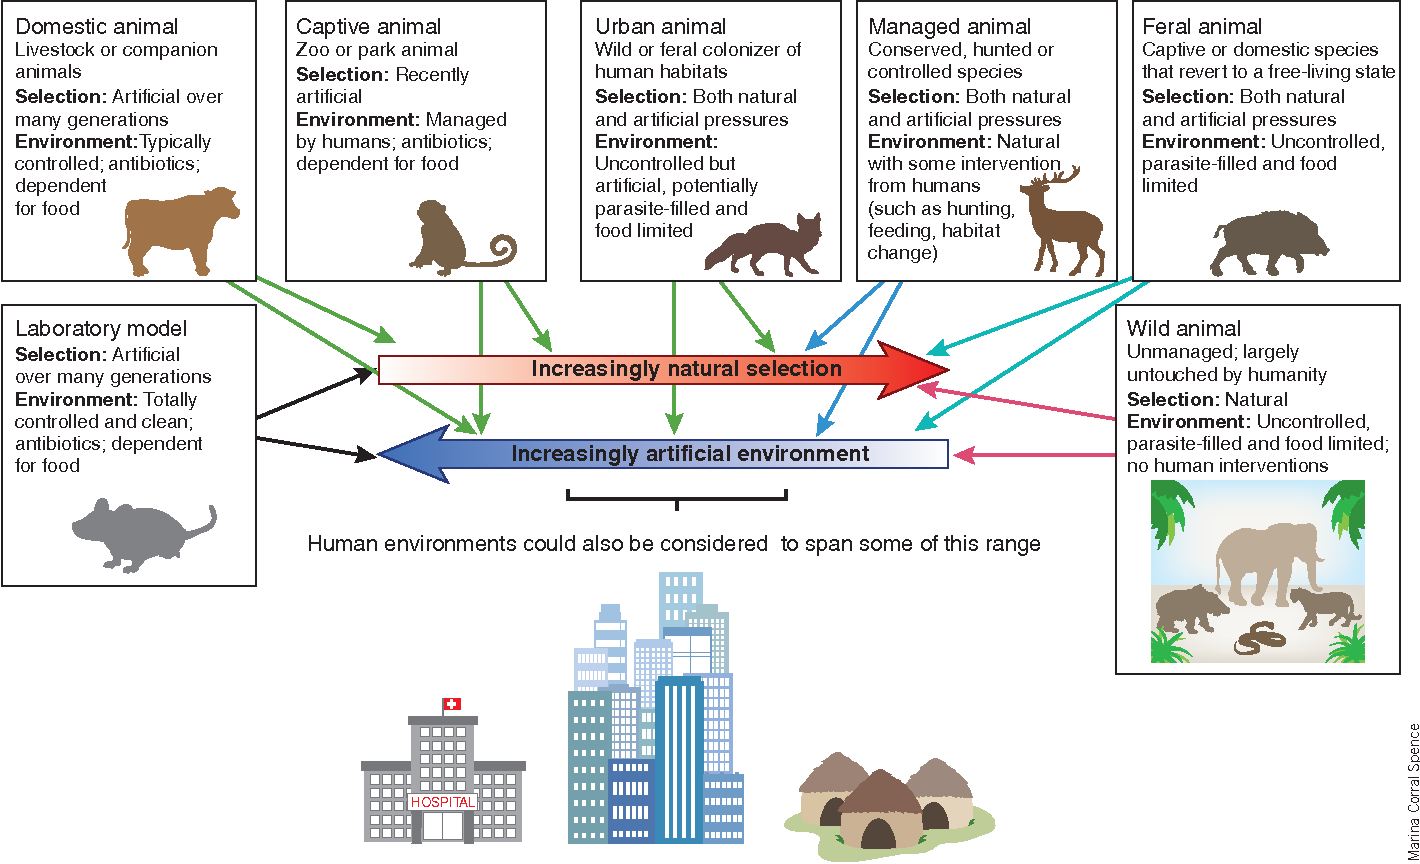 Figure 1 The continuum from laboratory model organism to a truly wild organism. Two key aspects of the continuum are the degree to which selection is anthropogenic versus natural in origin (red arrow, left to right) and the degree to which the environment is human controlled or created versus natural (blue arrow, right to left). Illustrative categories of animals with different selective histories and environments are placed very approximately along these axes with arrows (there is probably considerable variation in these categories of animals in their position on these continua, which is not shown here). The bedrock of modern immunology rests on the experimental power of working in the controlled but artificial systems at the far left of this spectrum, but much still remains to be learned about the causes and consequences of variation in immunological function from studies moving toward the wild end of this spectrum. Human communities can also be considered to vary along a limited area of the blue environmental continuum.